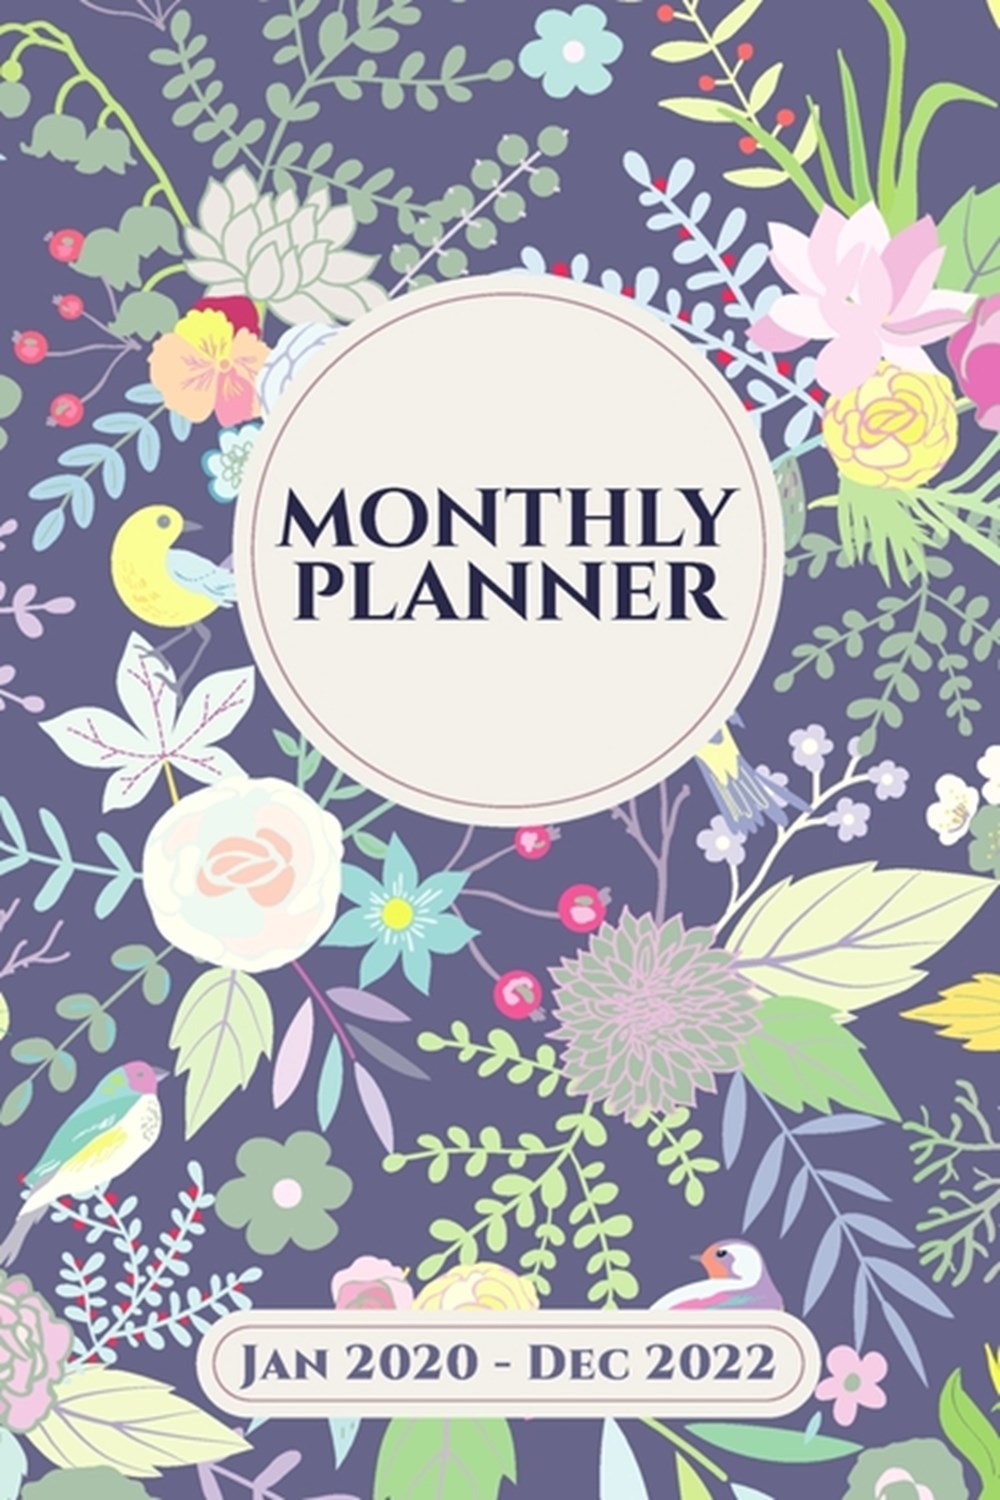 Three Year Monthly Planner and Agenda - January 2020 to December 2022 Calendar Organizer for Student